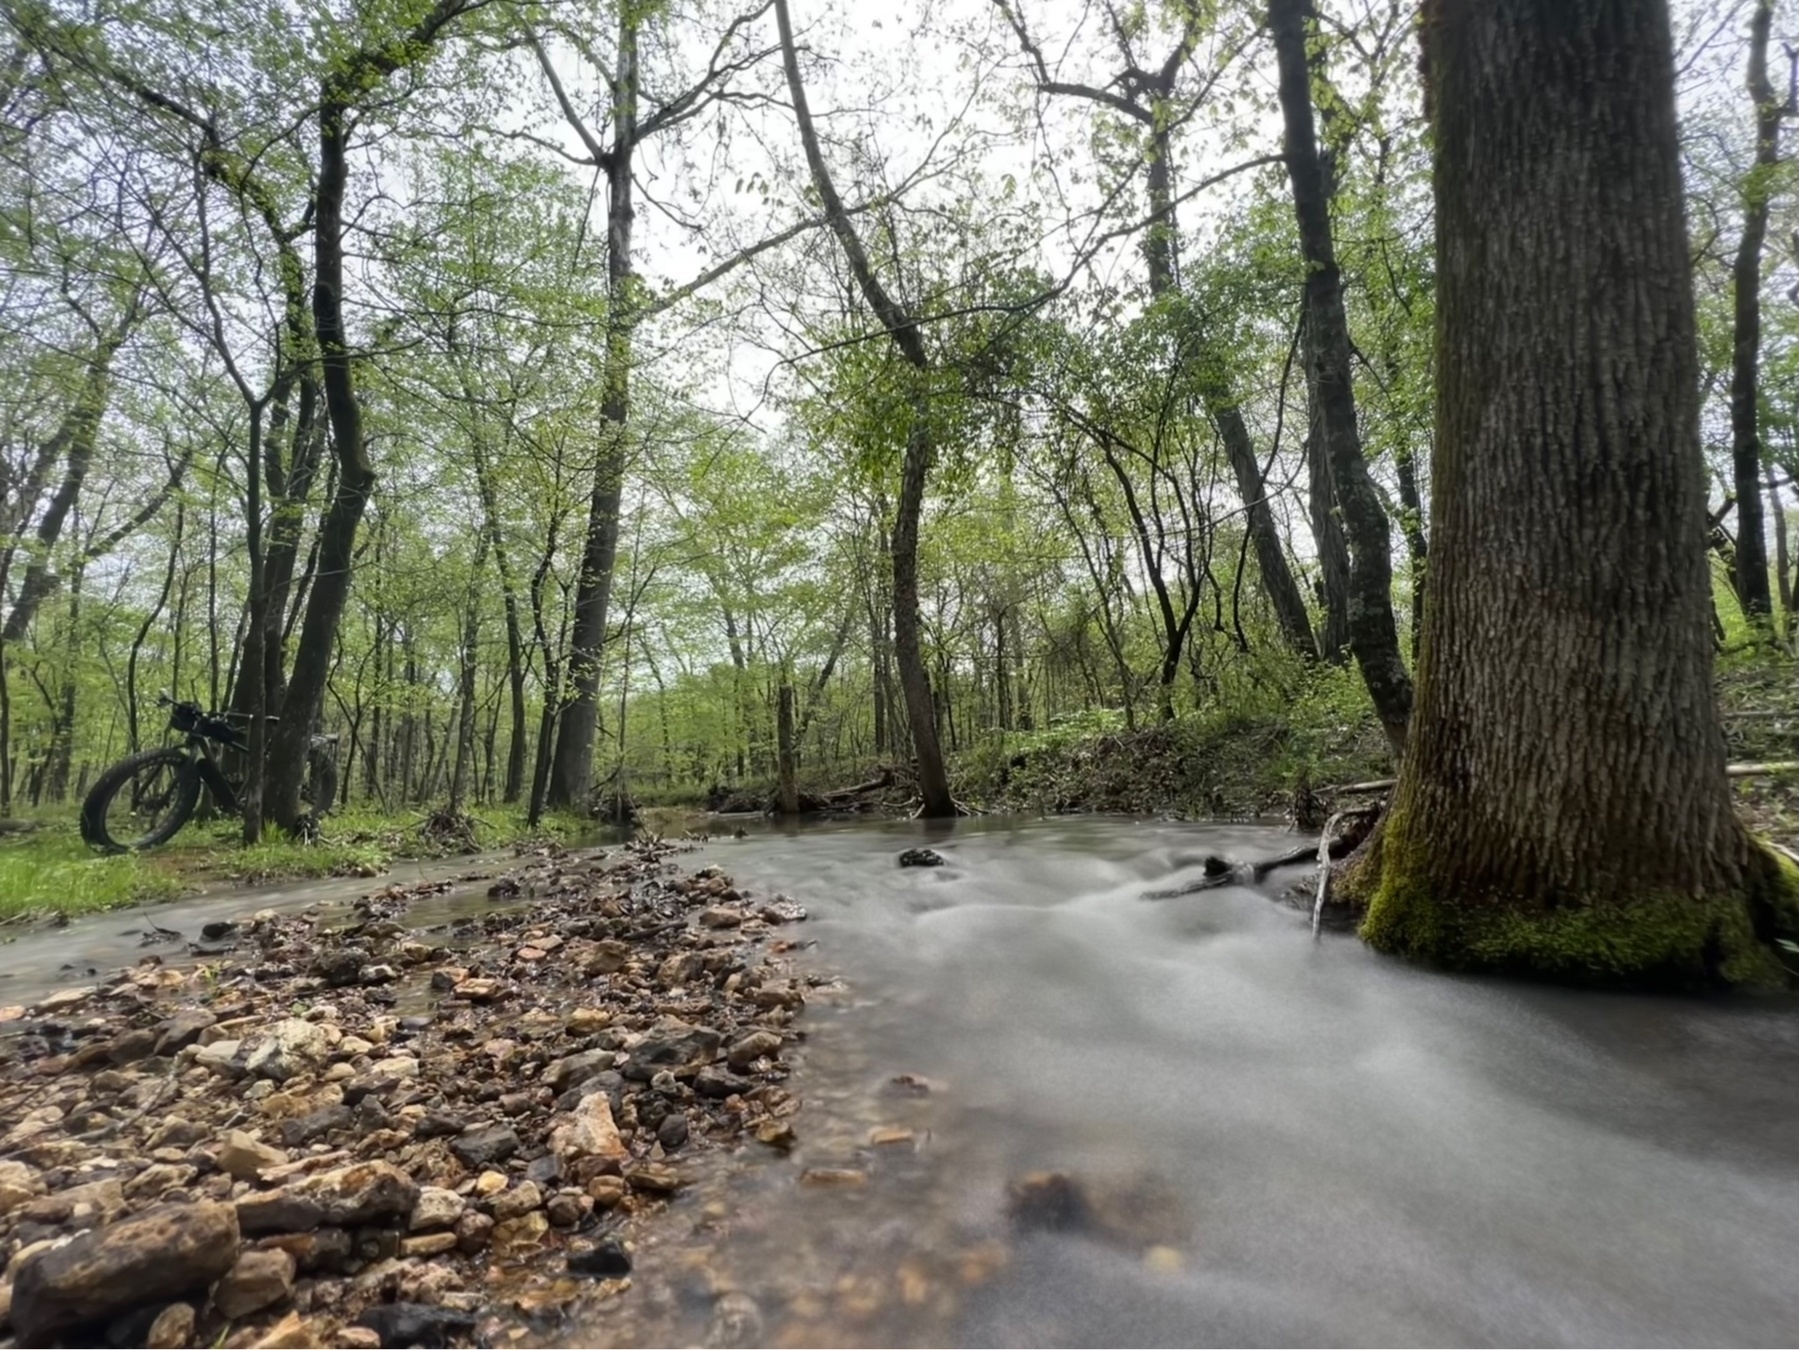 The blurred running water of a creek in the woods, a bike leans against a tree on the far left side